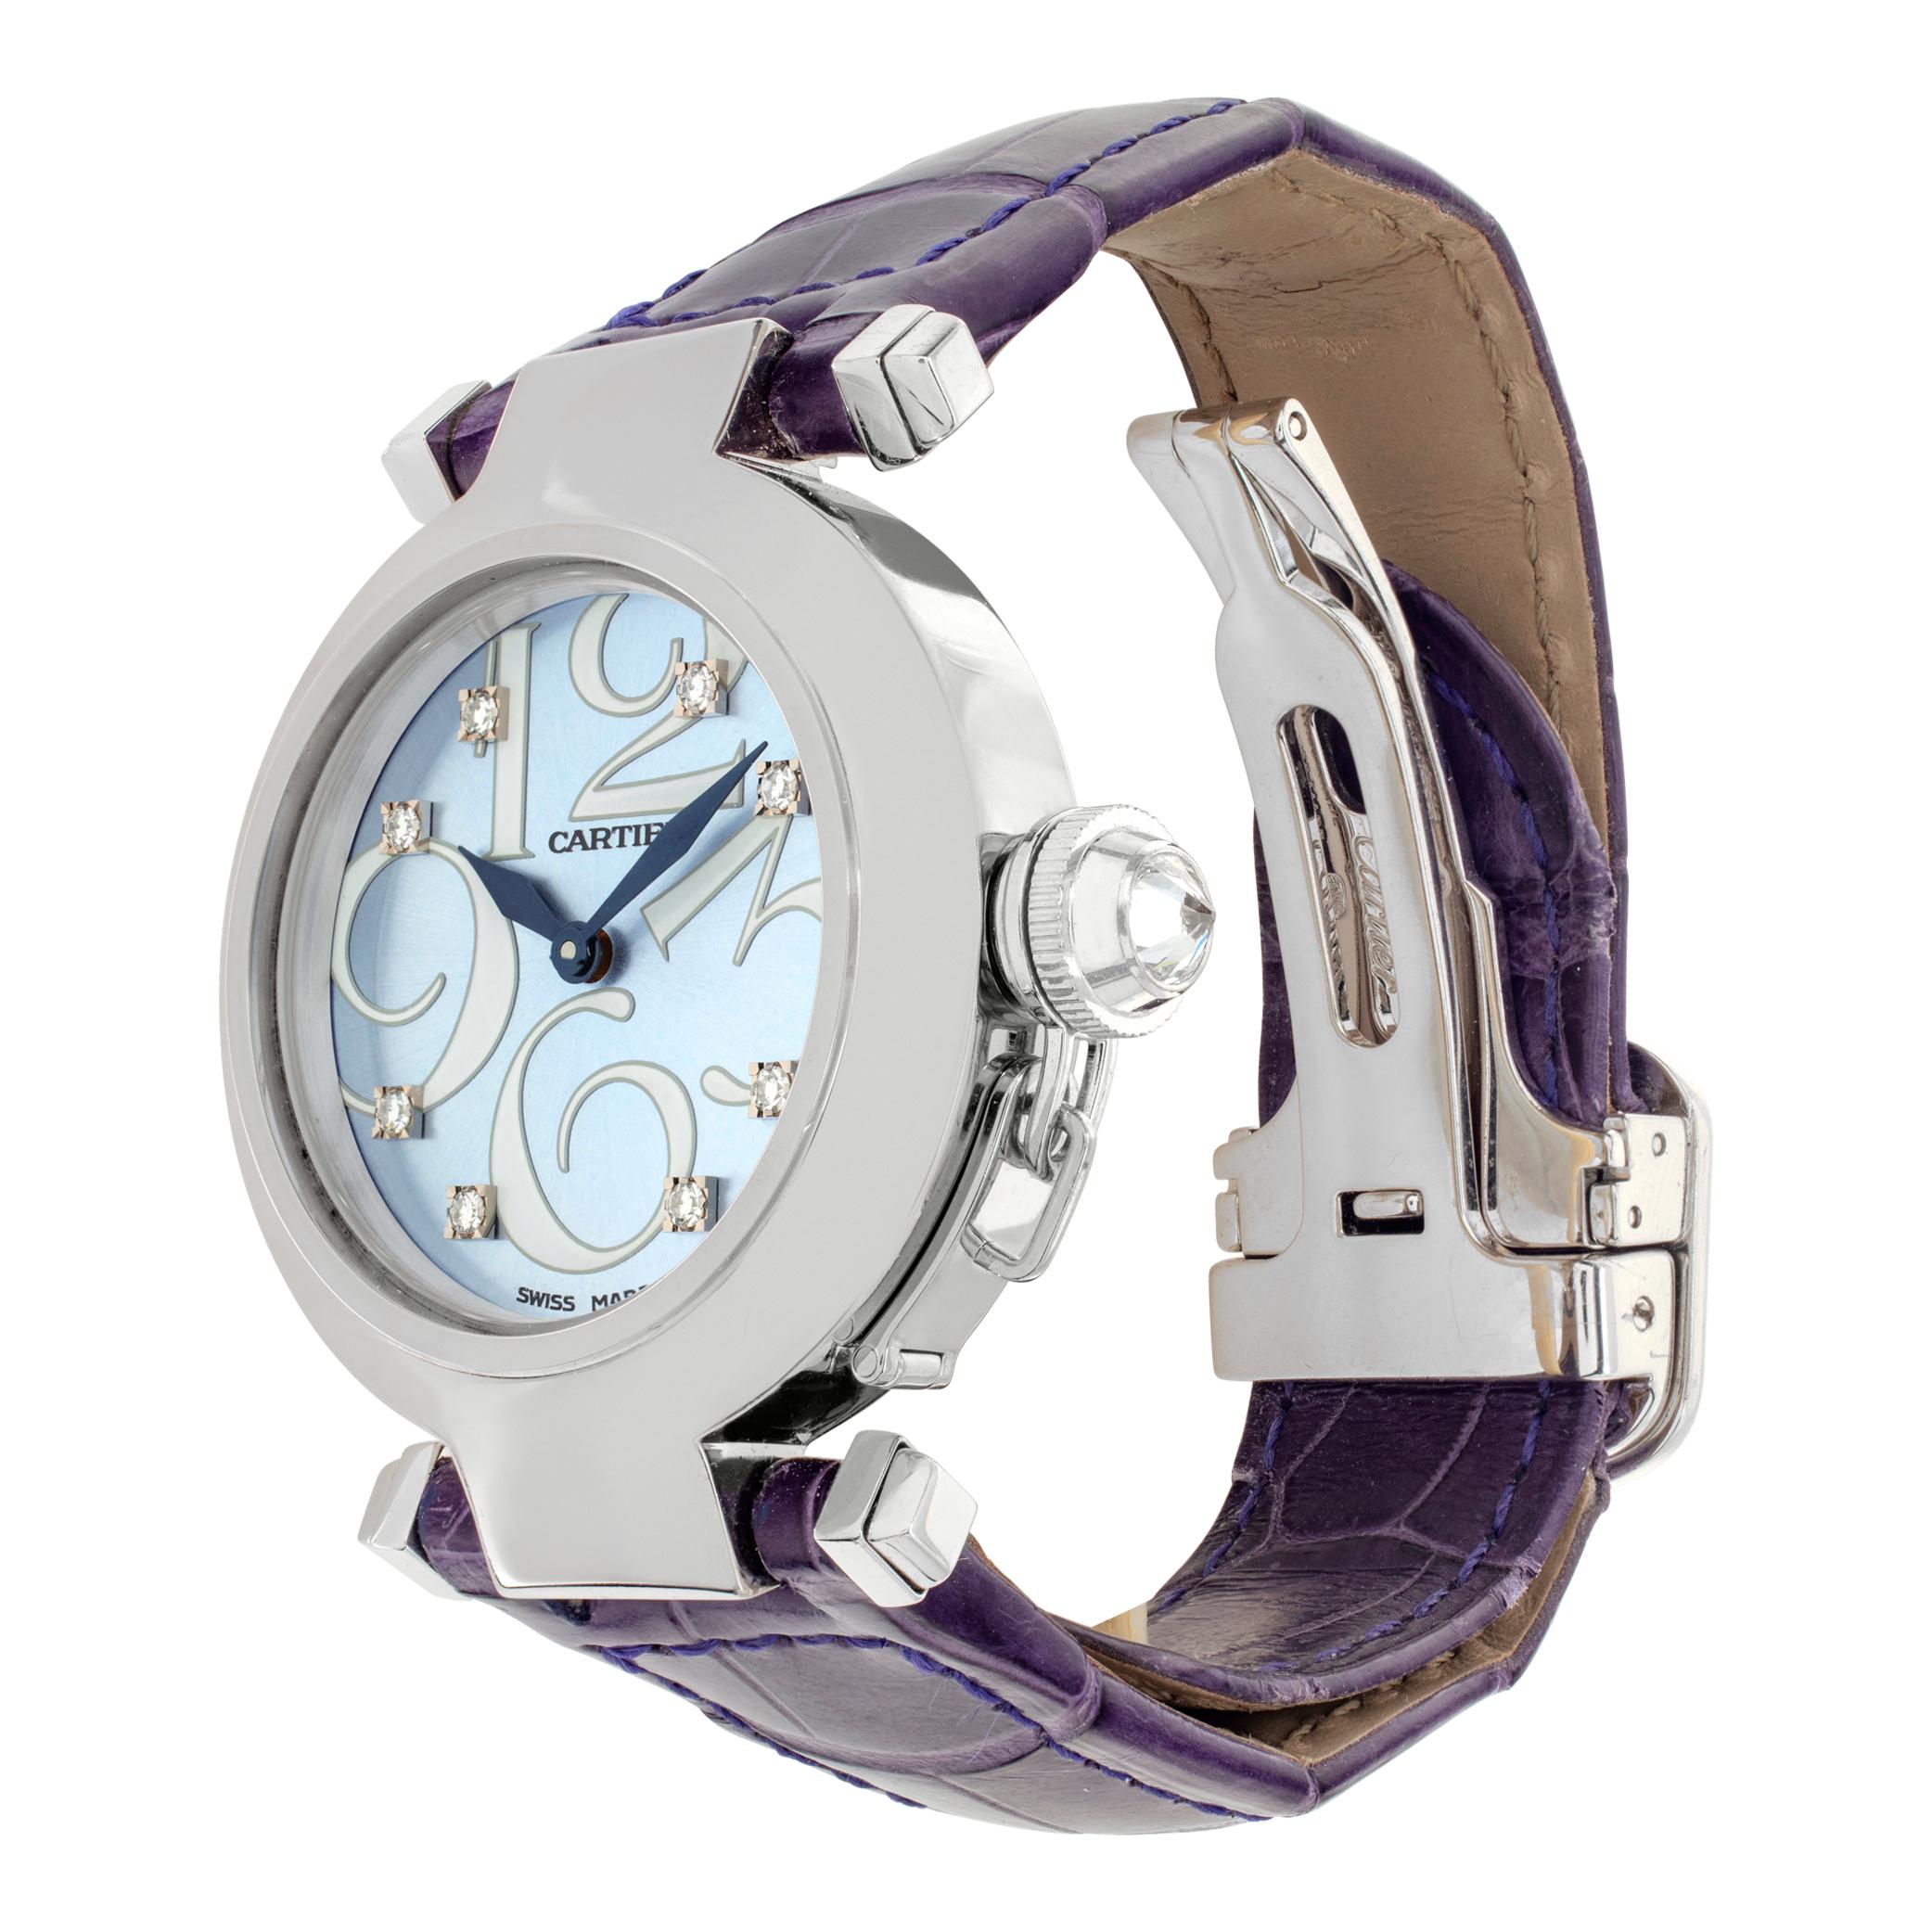 Cartier Pasha 32mm in 18k white gold with light blue diamond dial and diamond crown on a purple alligator strap with deployant buckle. Quartz. 32 mm case size. Ref 2813. Fine Pre-owned Cartier Watch. Certified preowned Classic Cartier Pasha WJ123121